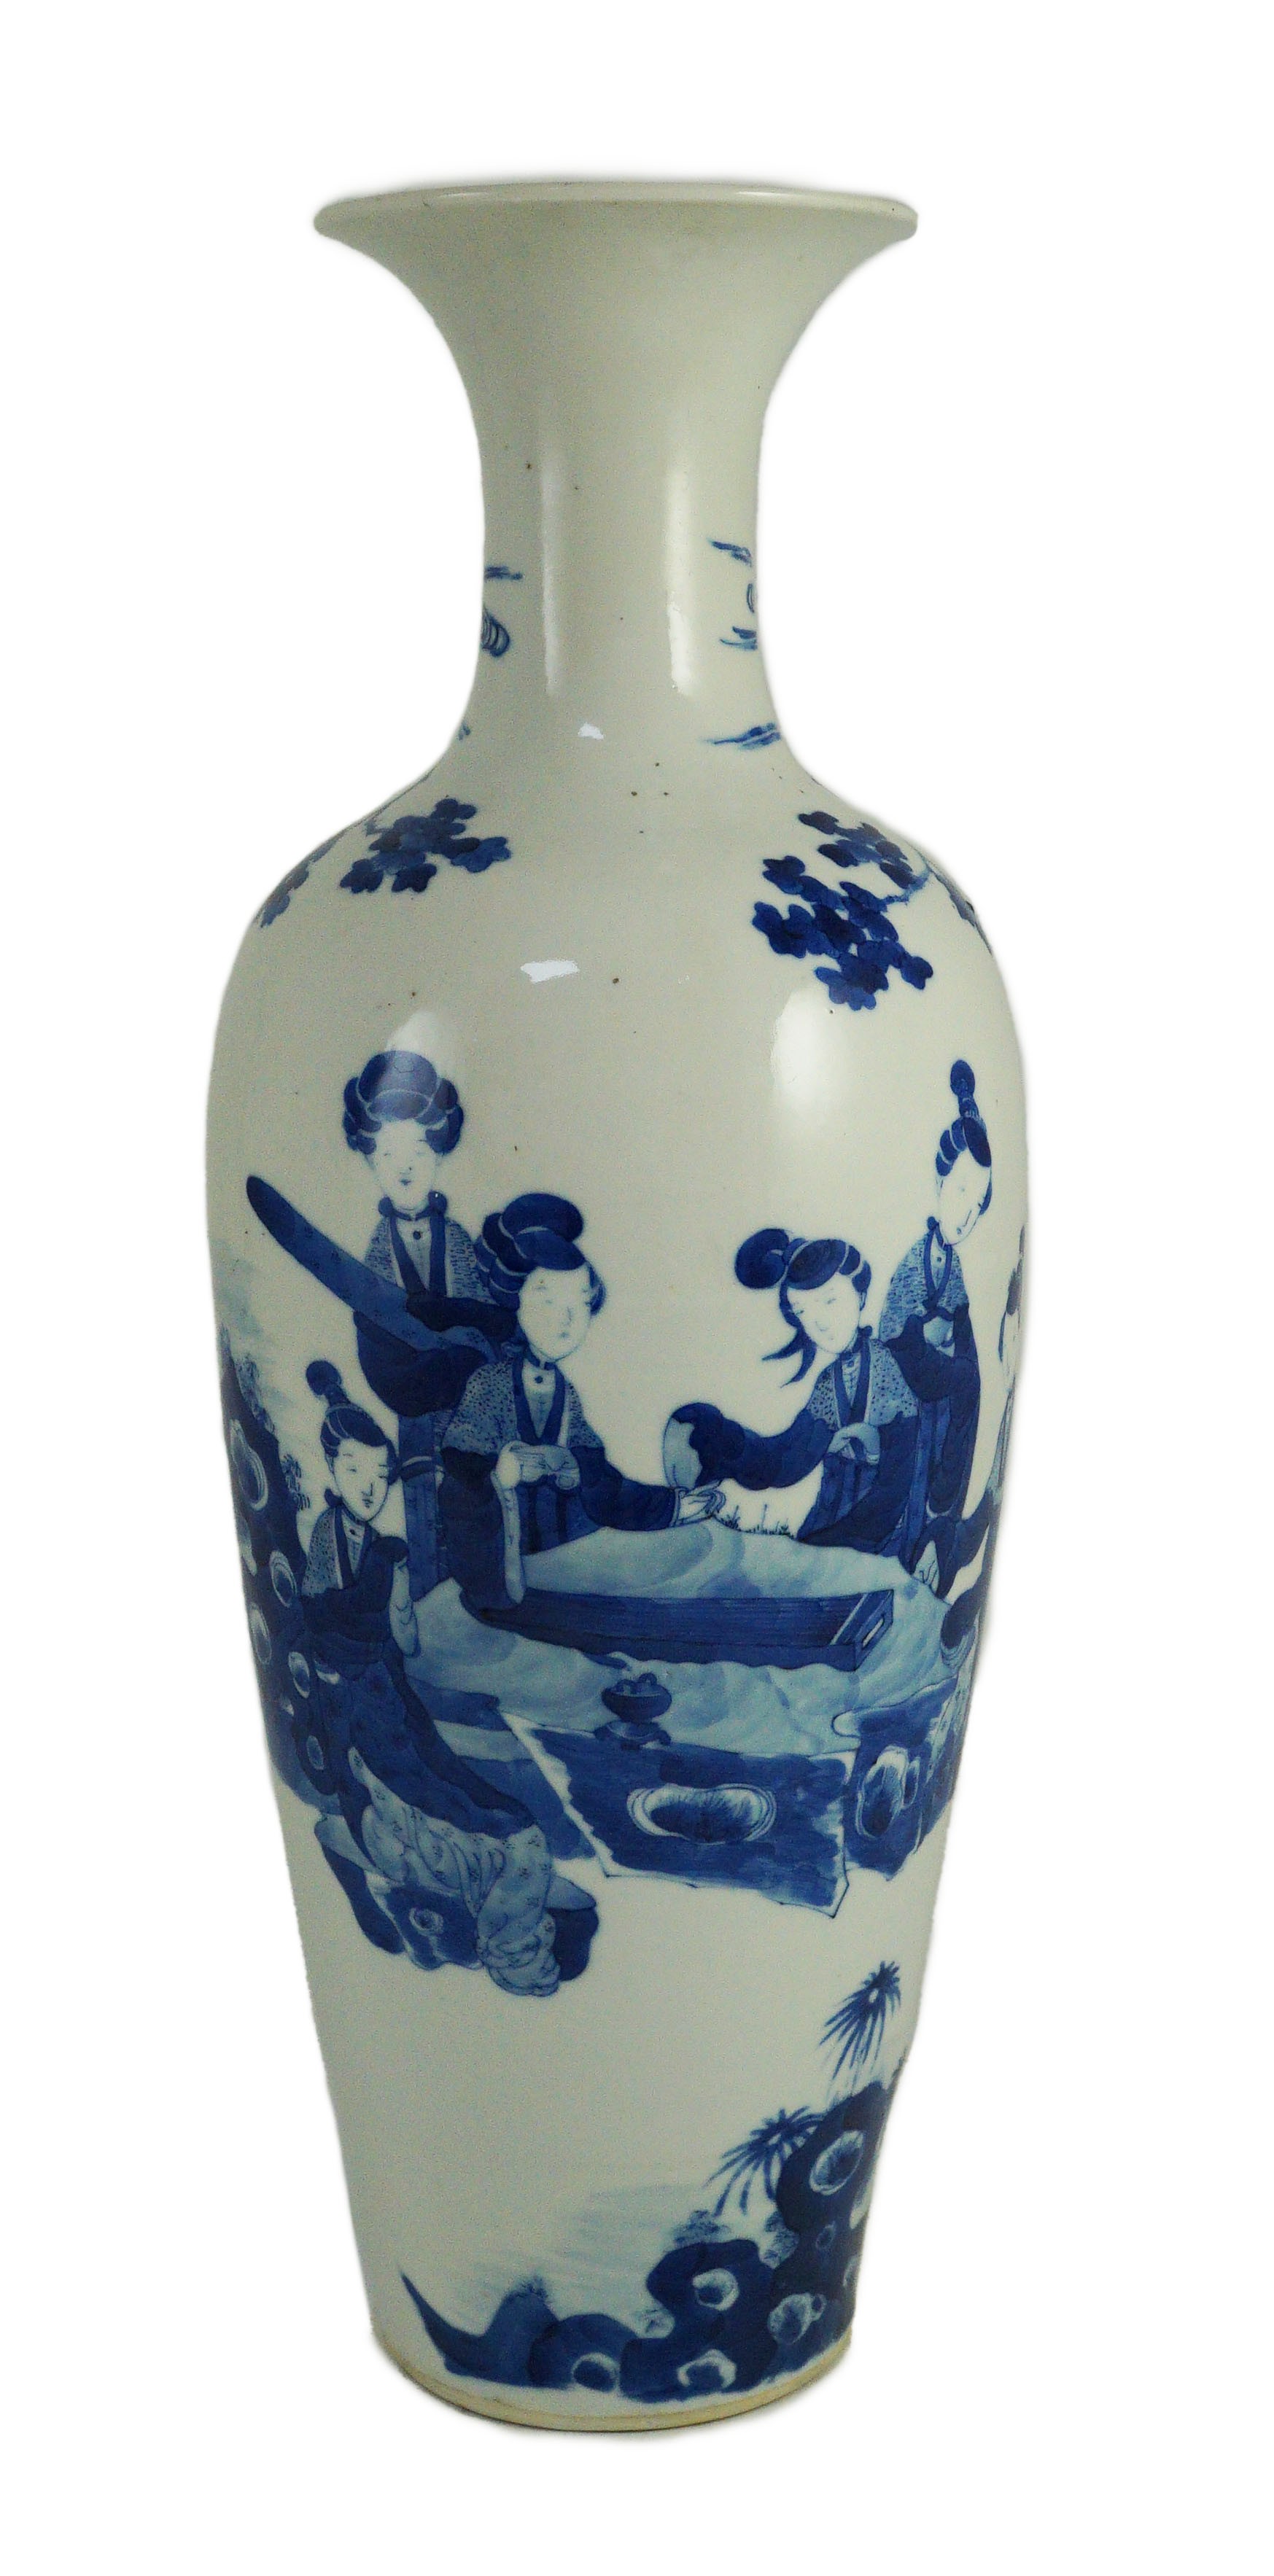 A tall Chinese blue and white ladies vase, laifu zun, 19th century, 44.5cm high, neck restored